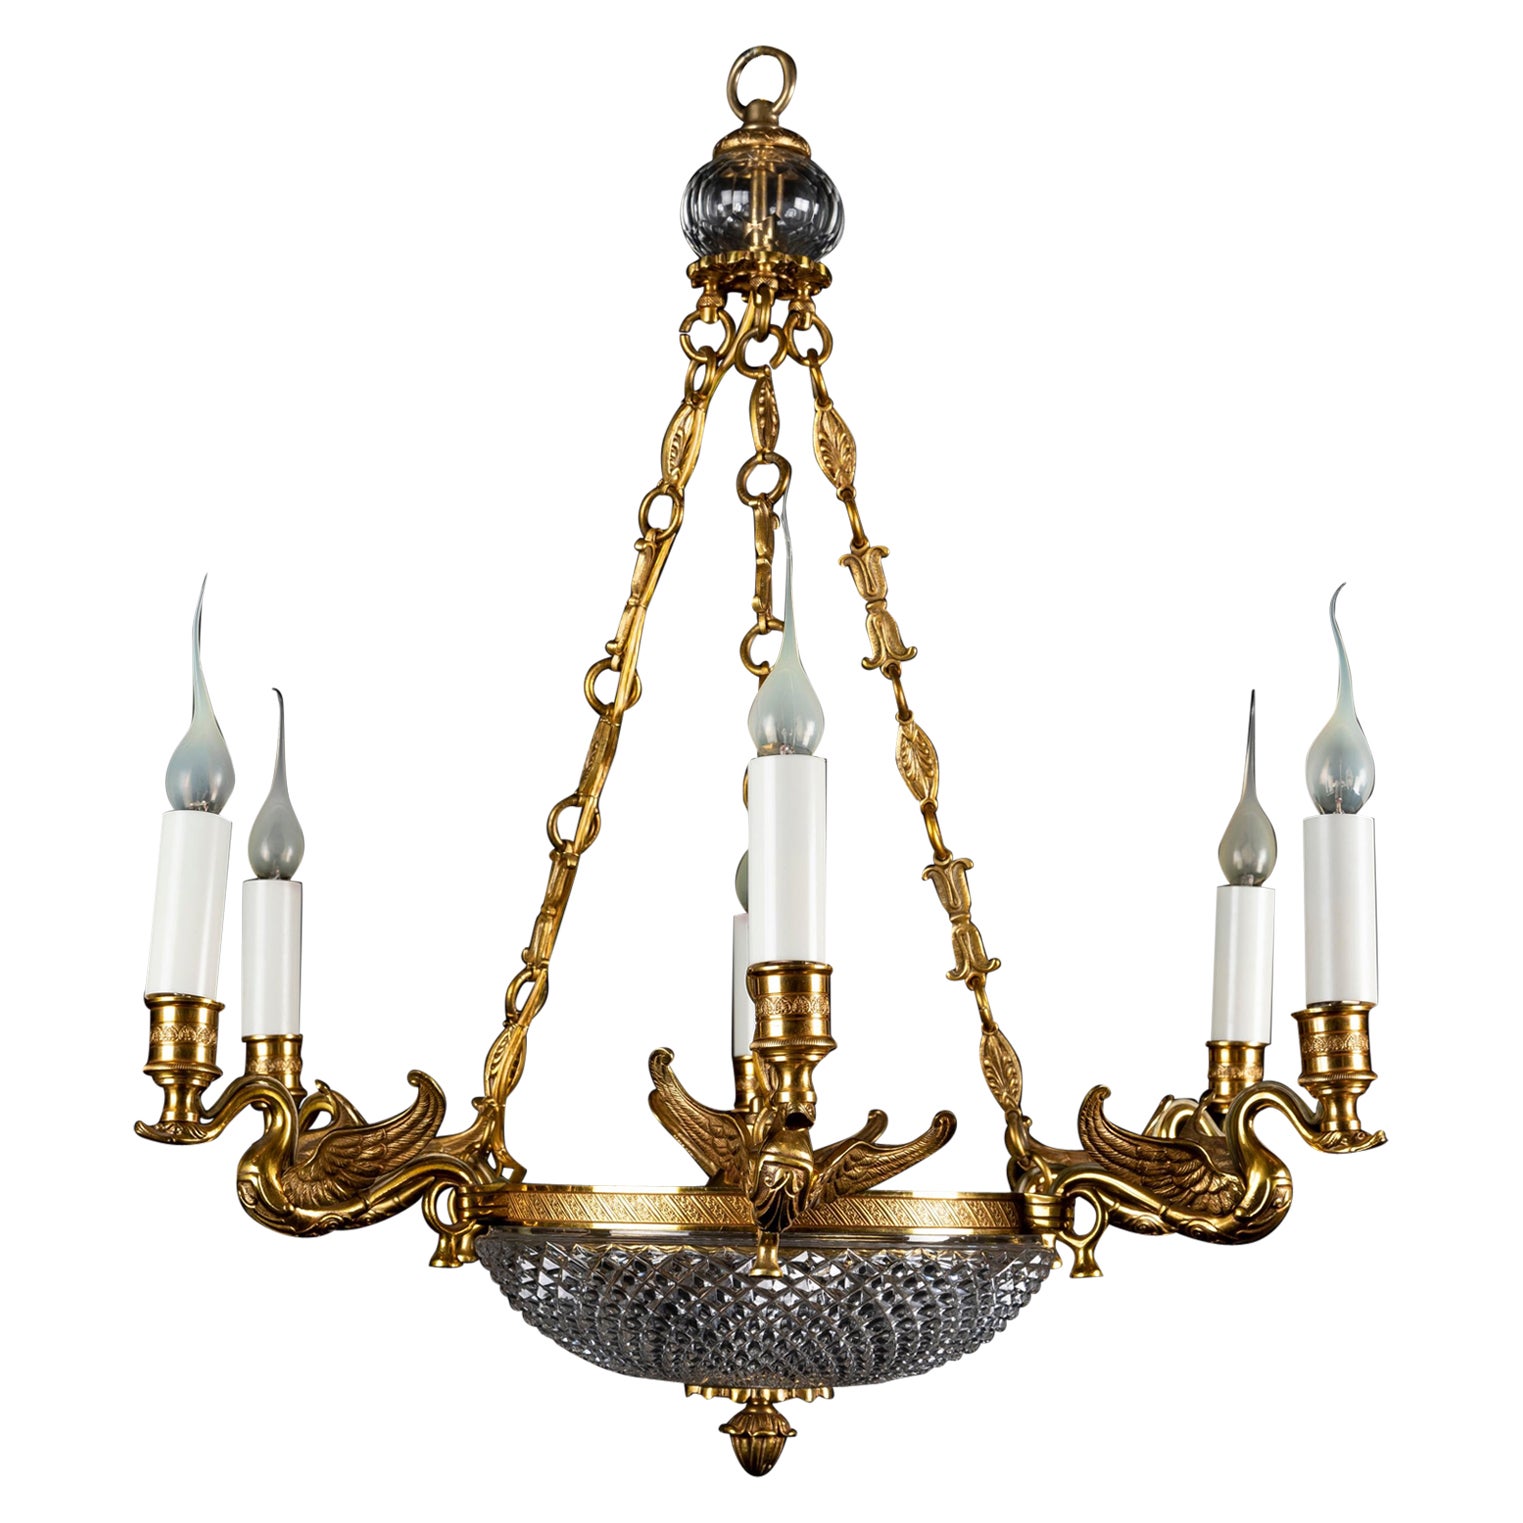 A Fine French Empire Style Gilt Bronze and Crystal Swan Chandelier